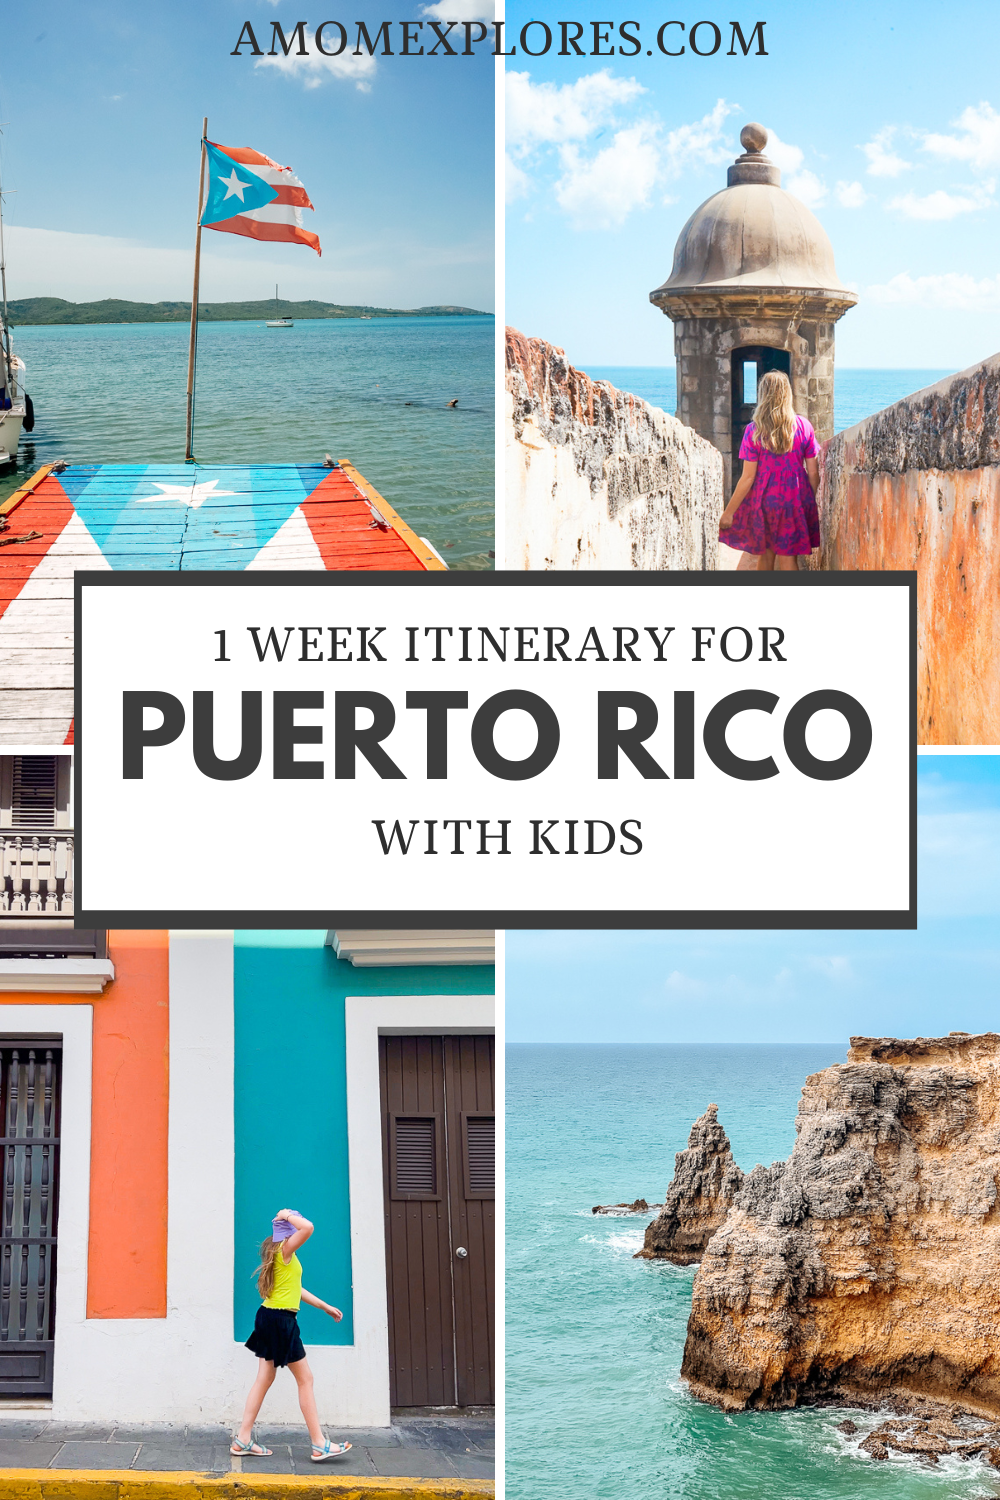 1 WEEK ITINERARY FOR PUERTO RICO WITH KIDS.png